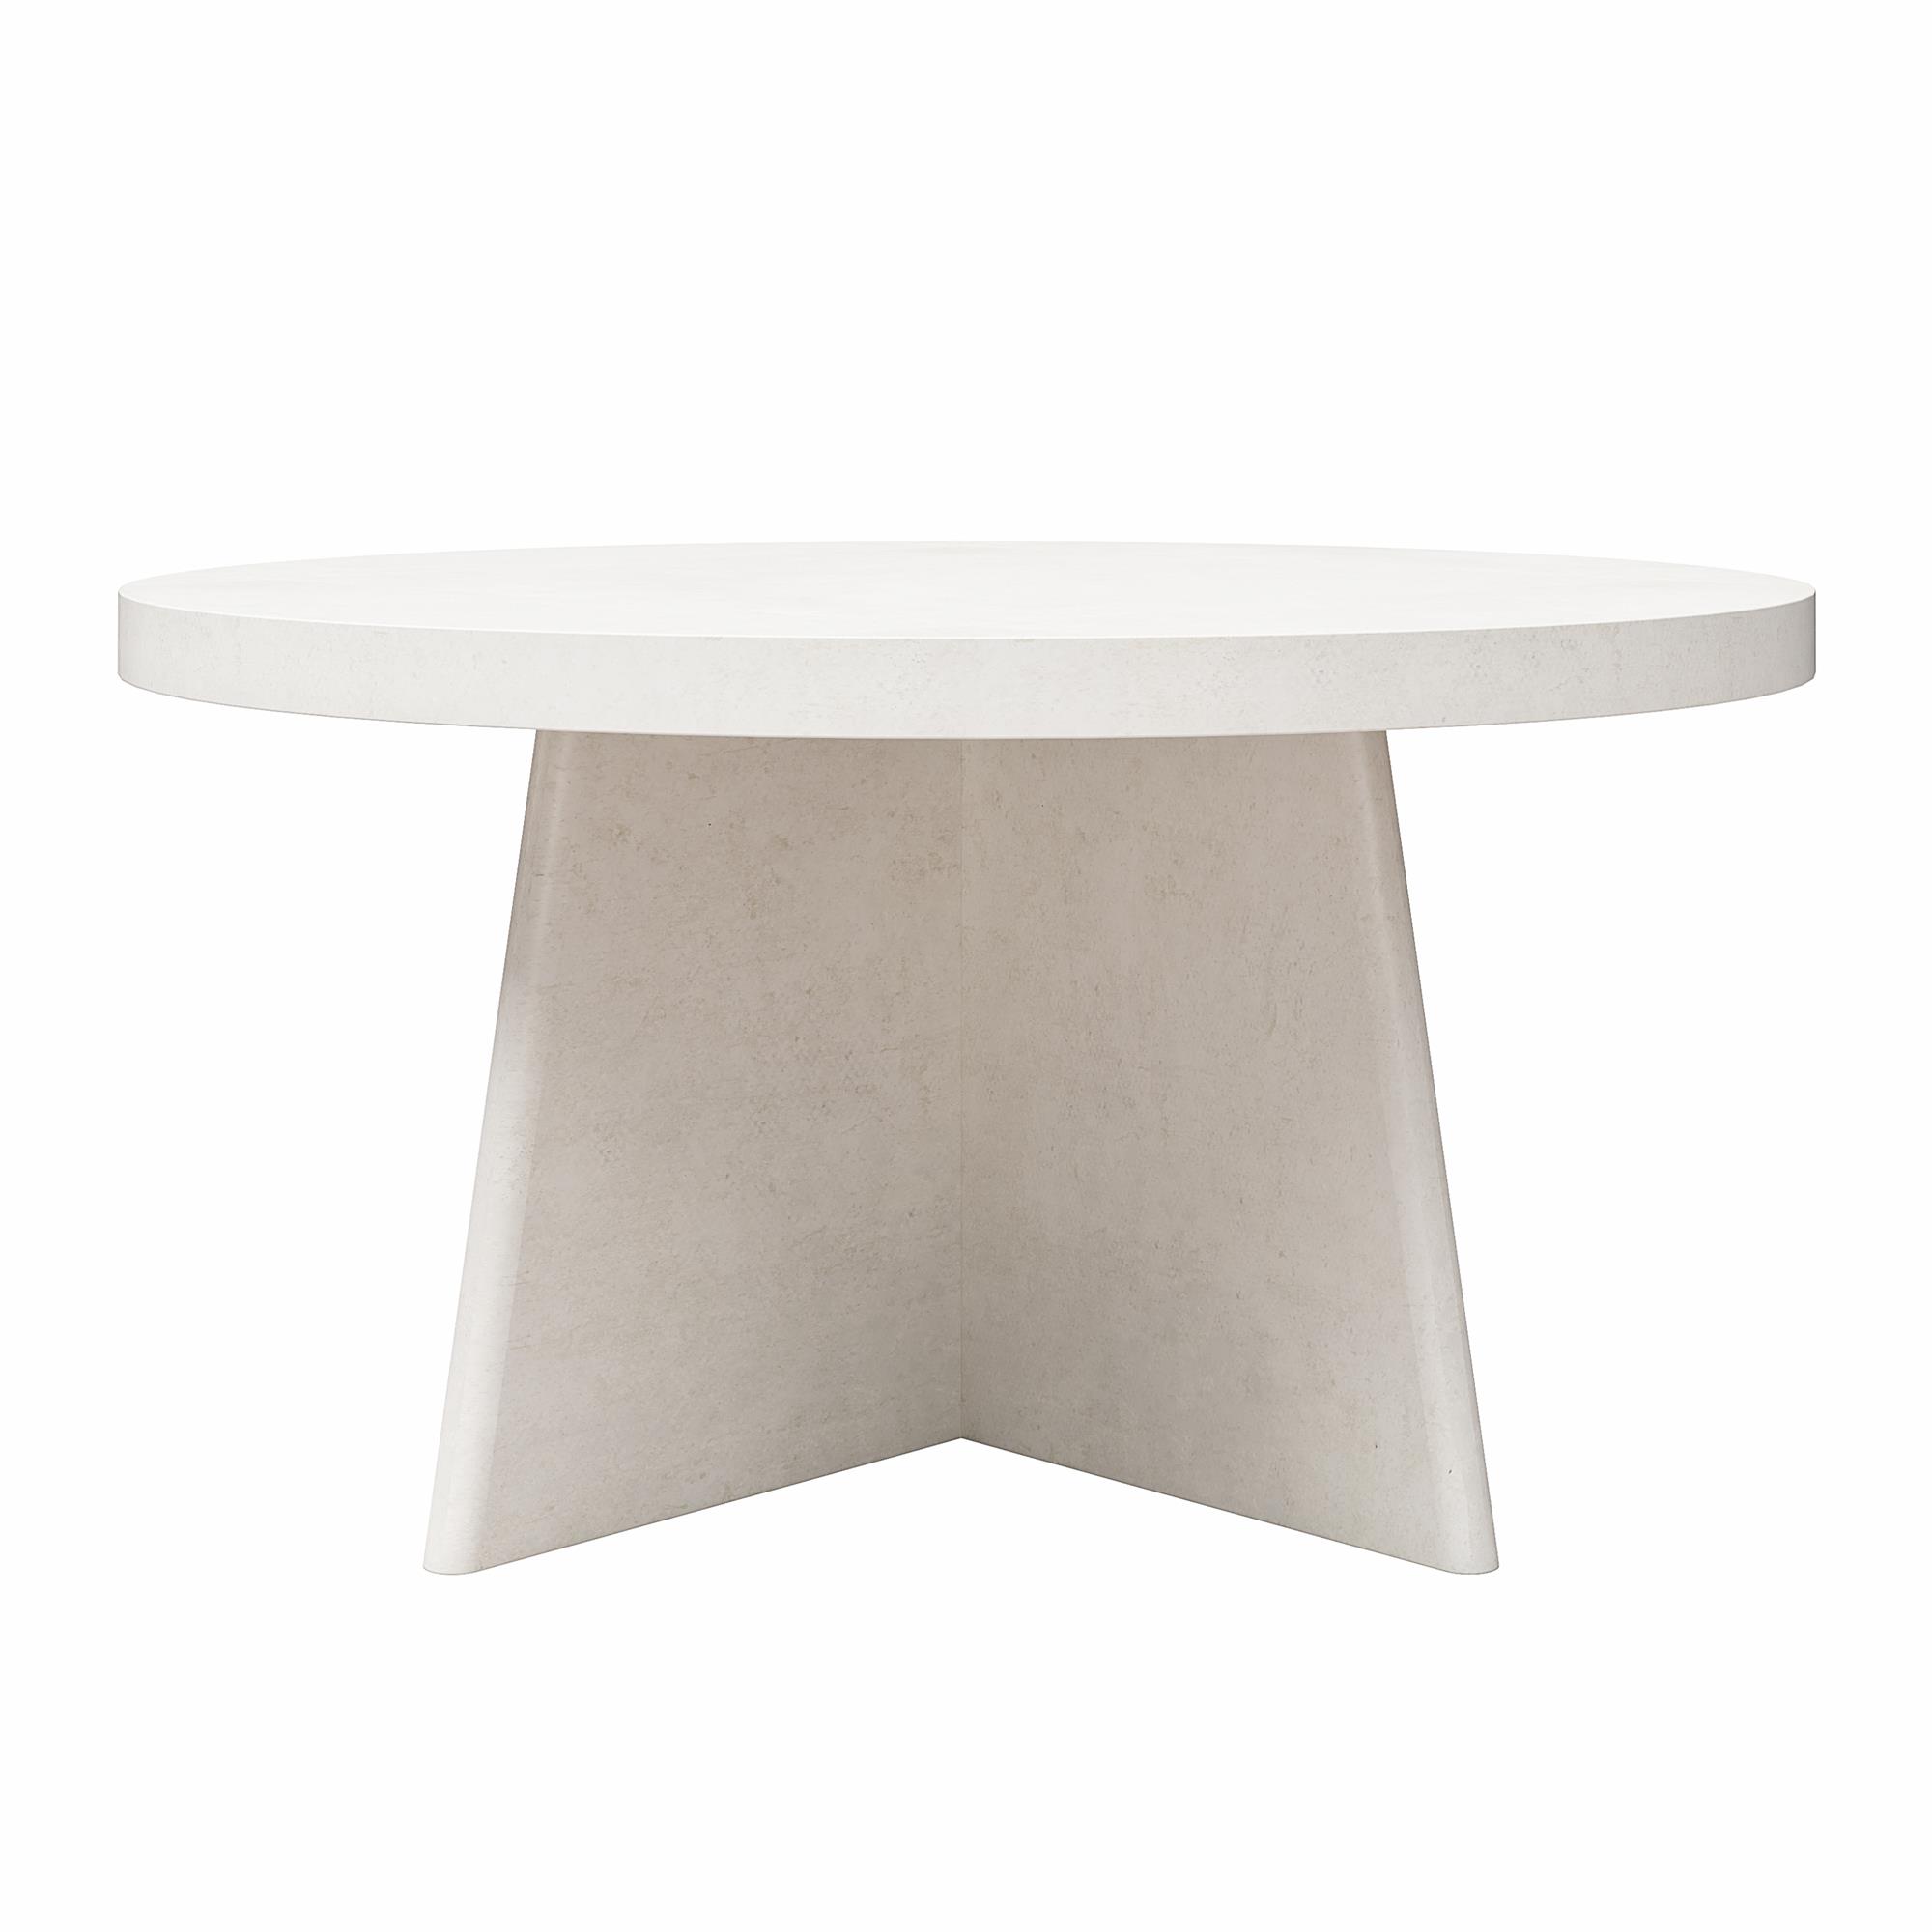 Ameriwood Home Liam Coffee Table, Faux Plaster - image 4 of 11